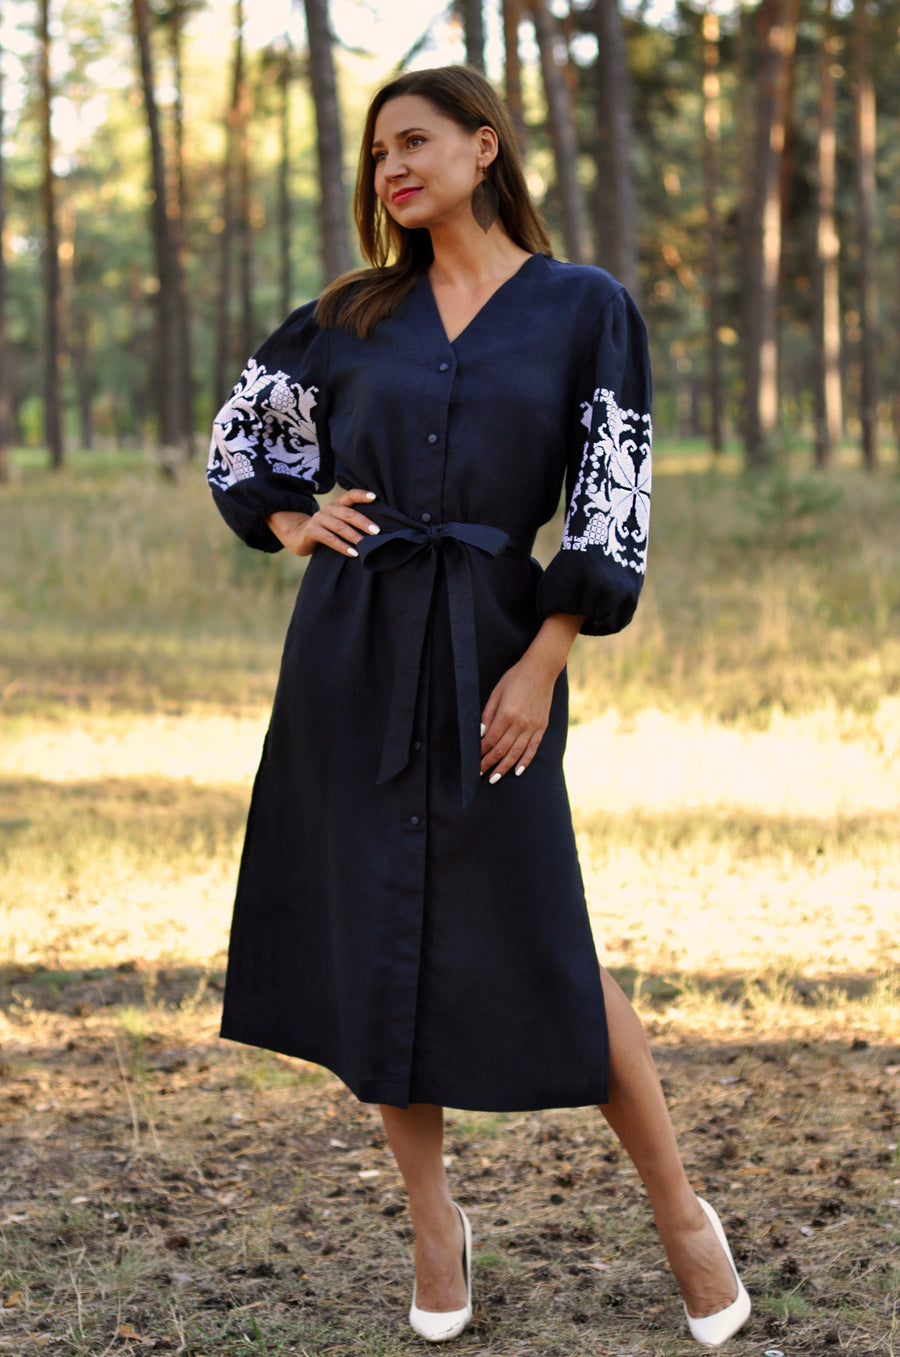 Robe dress made of natural linen with contrasting embroidery